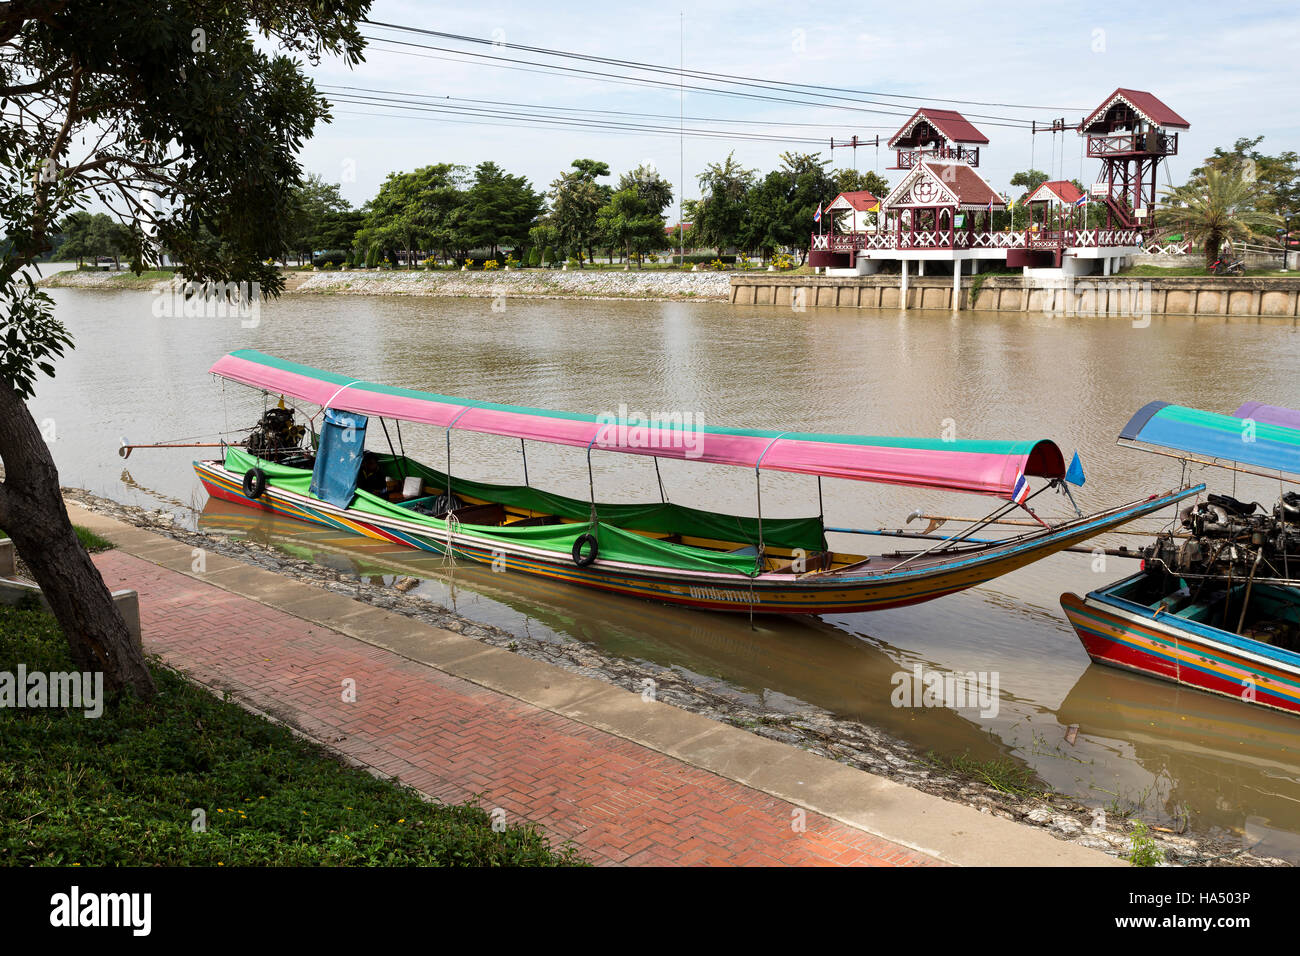 View of a long tail boat, a type of watercraft native to Southeast Asia which uses a common automotive engine, in the Chao Phraya River, Thailand Stock Photo